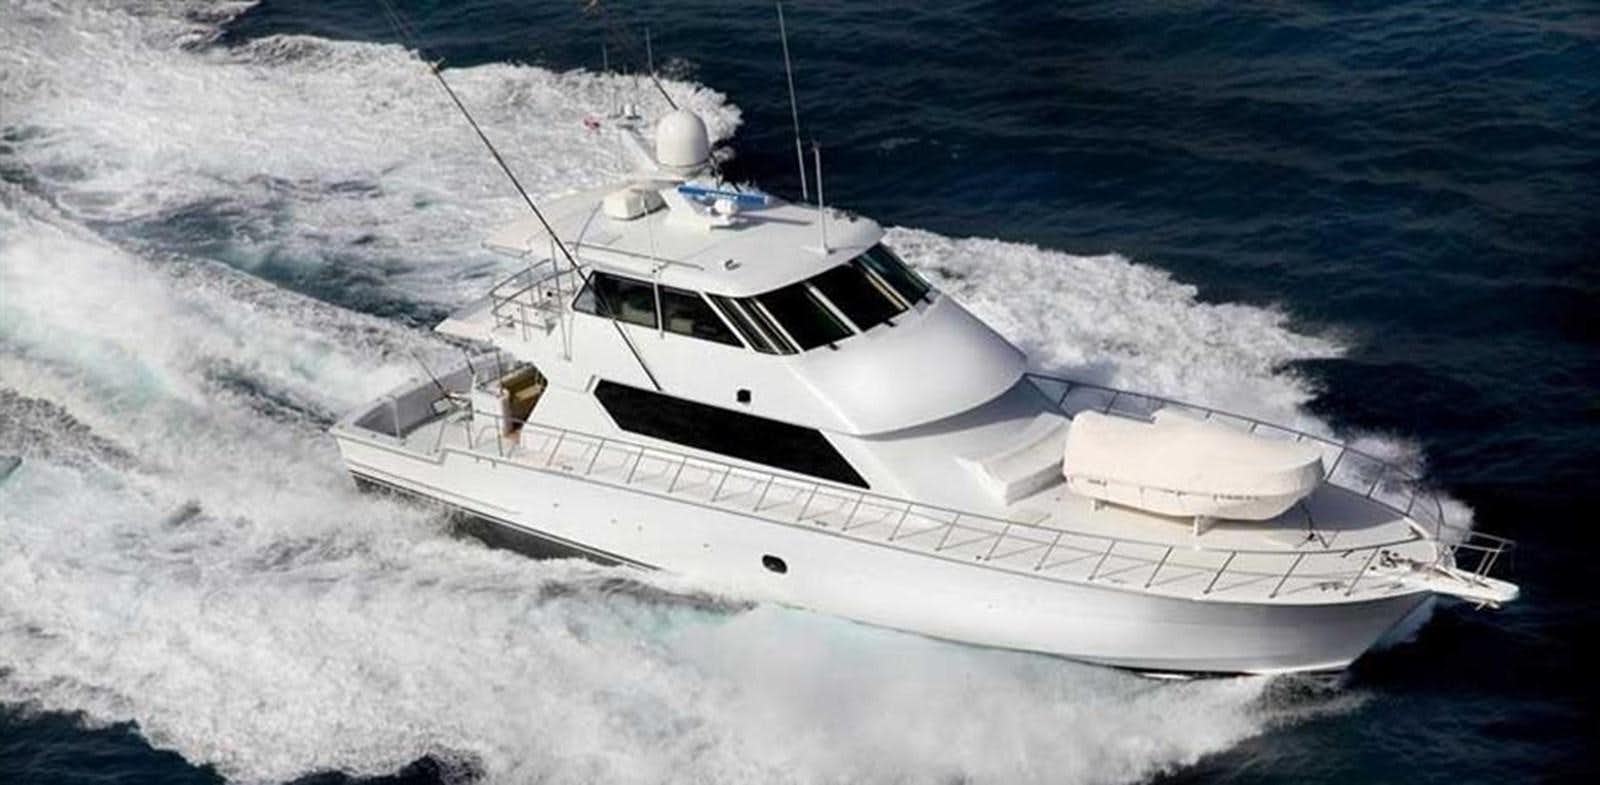 Big Fishing Boats for Sale, Buy a Superyacht for Fishing